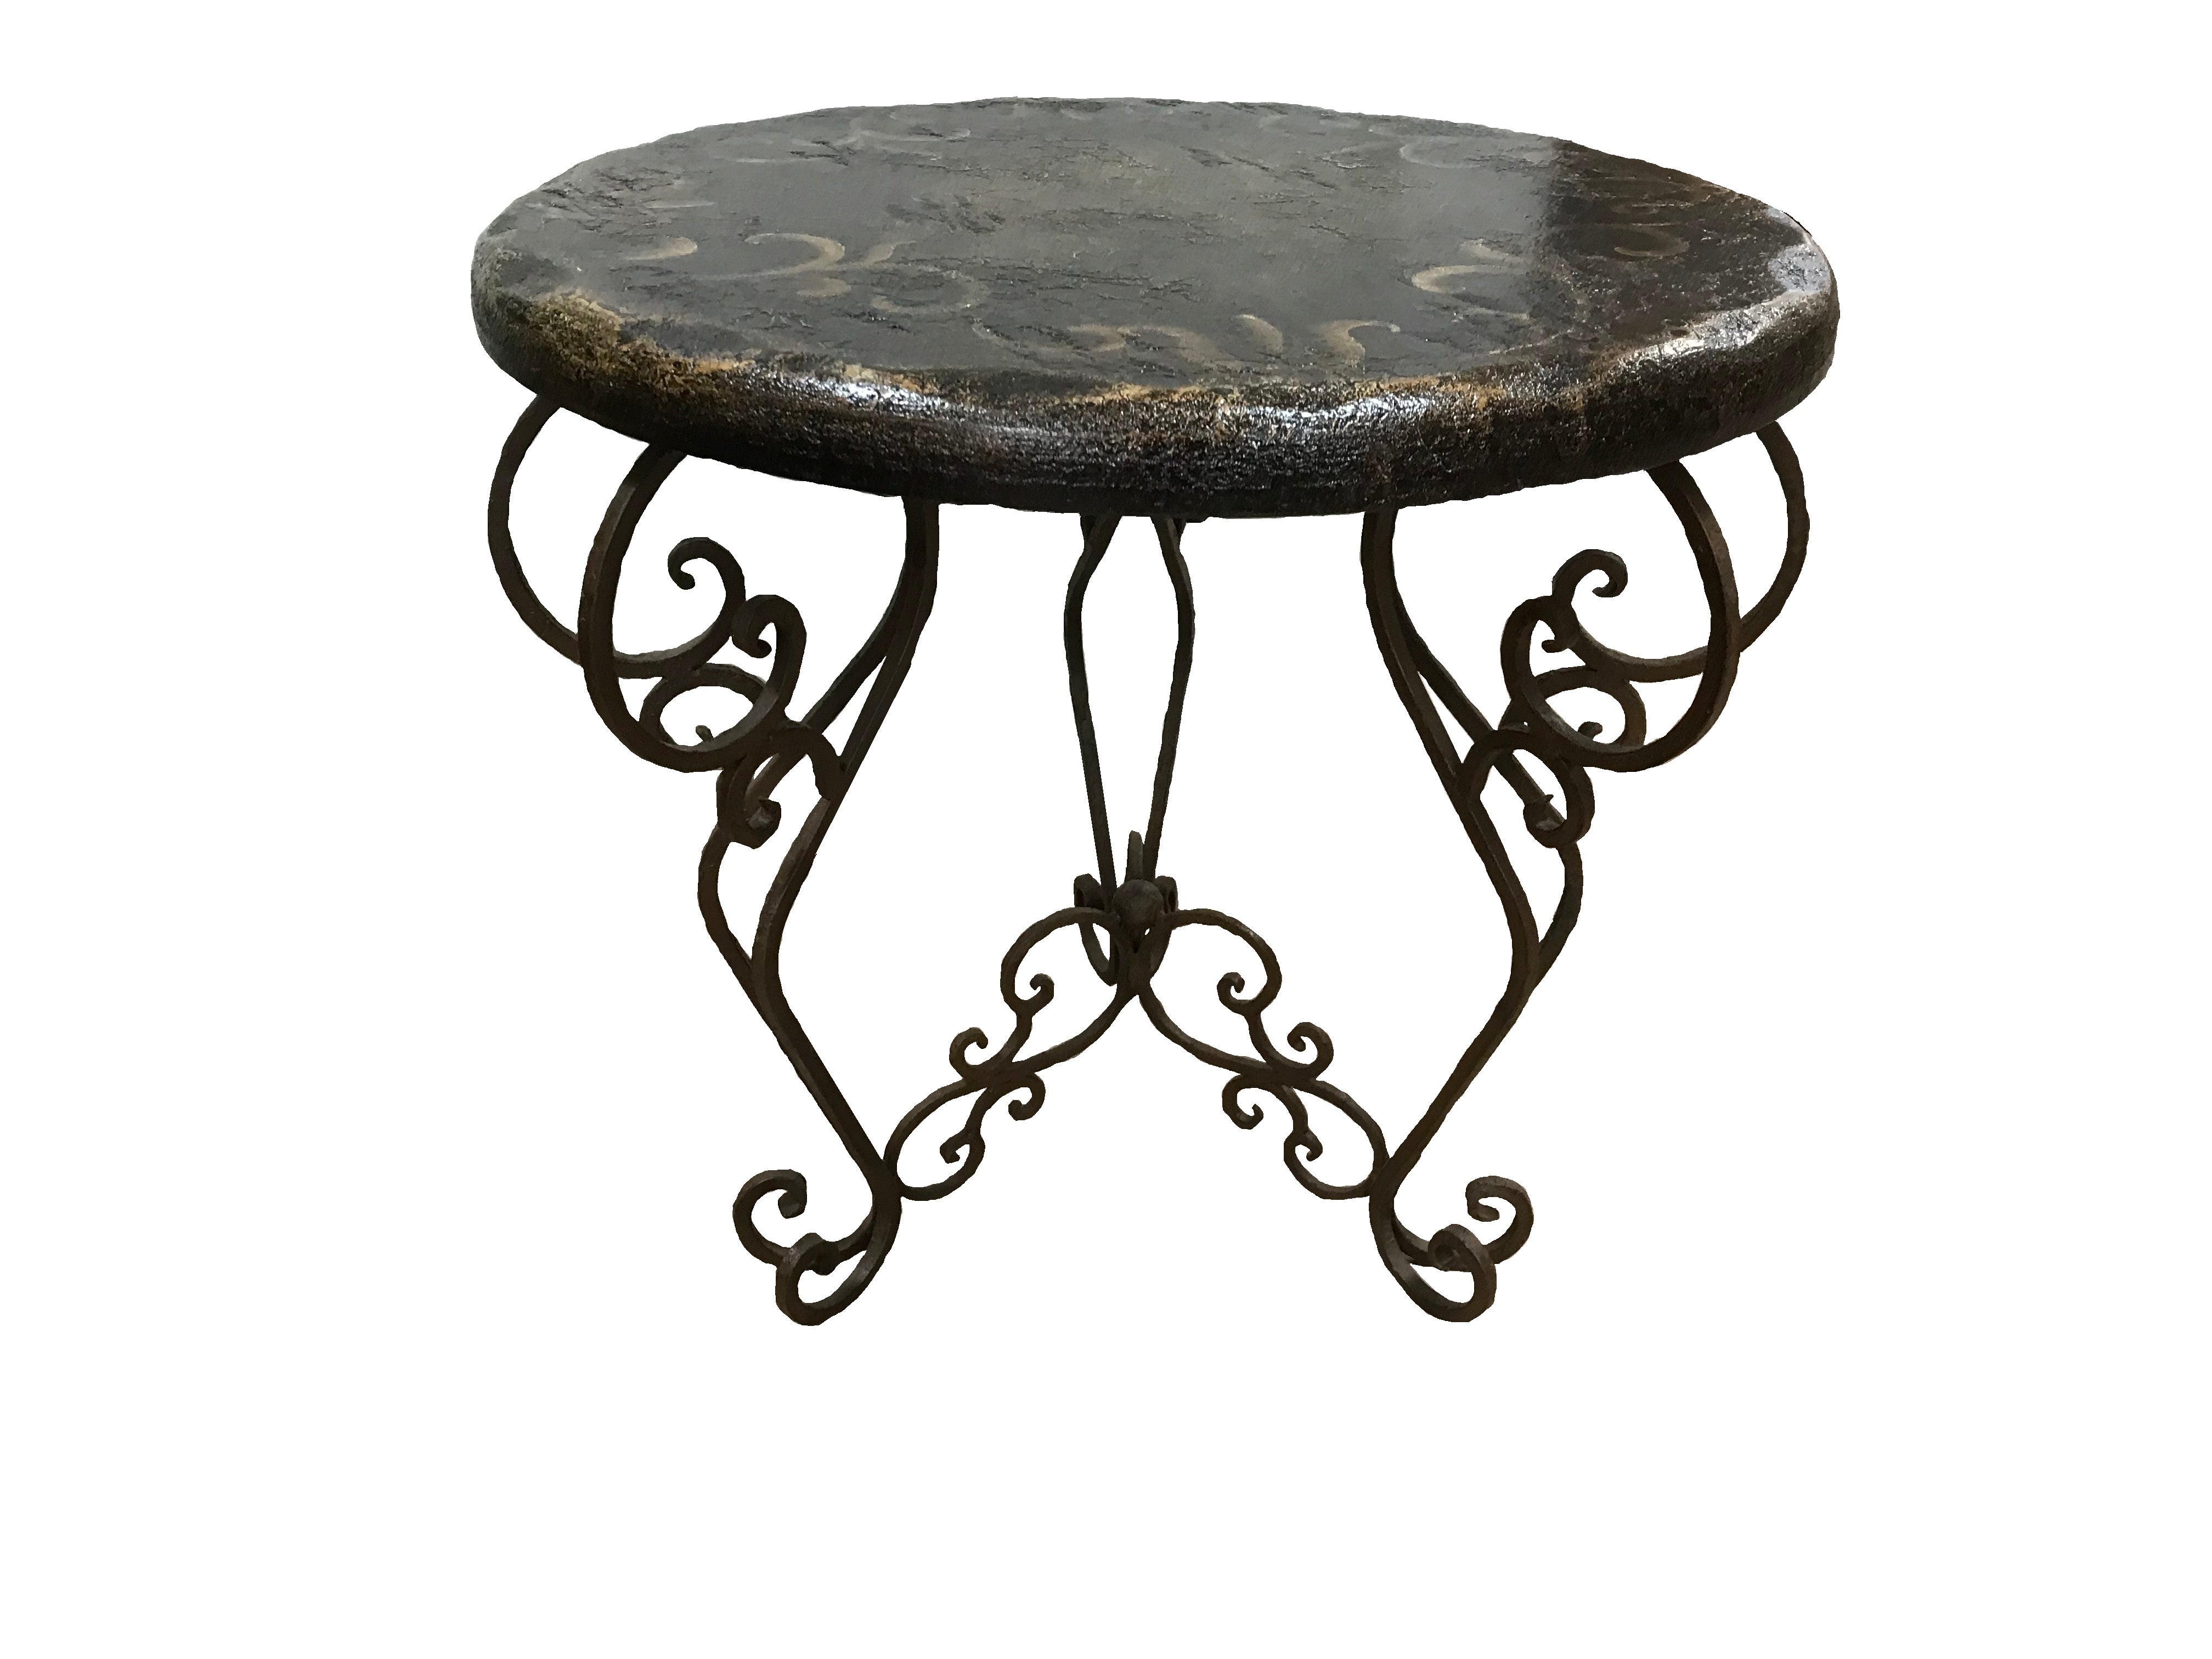 Peruvian Home Furnishings Granada Wrought Iron Hand Painted Wood Accent Table